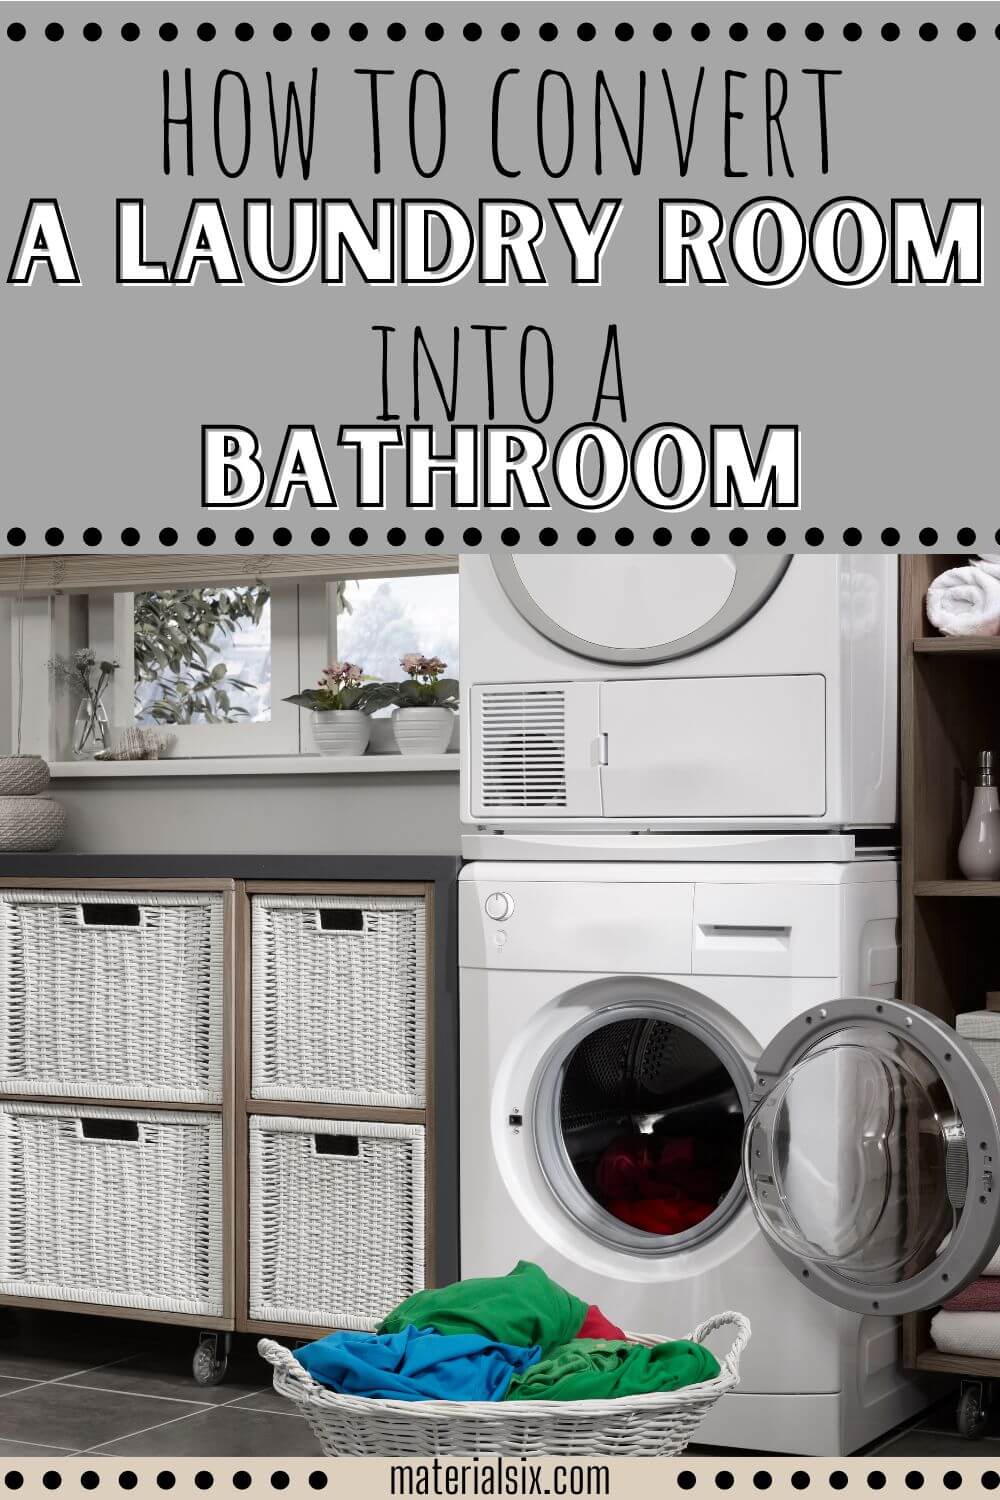 How to Convert a Laundry Room Into a Bathroom (1)